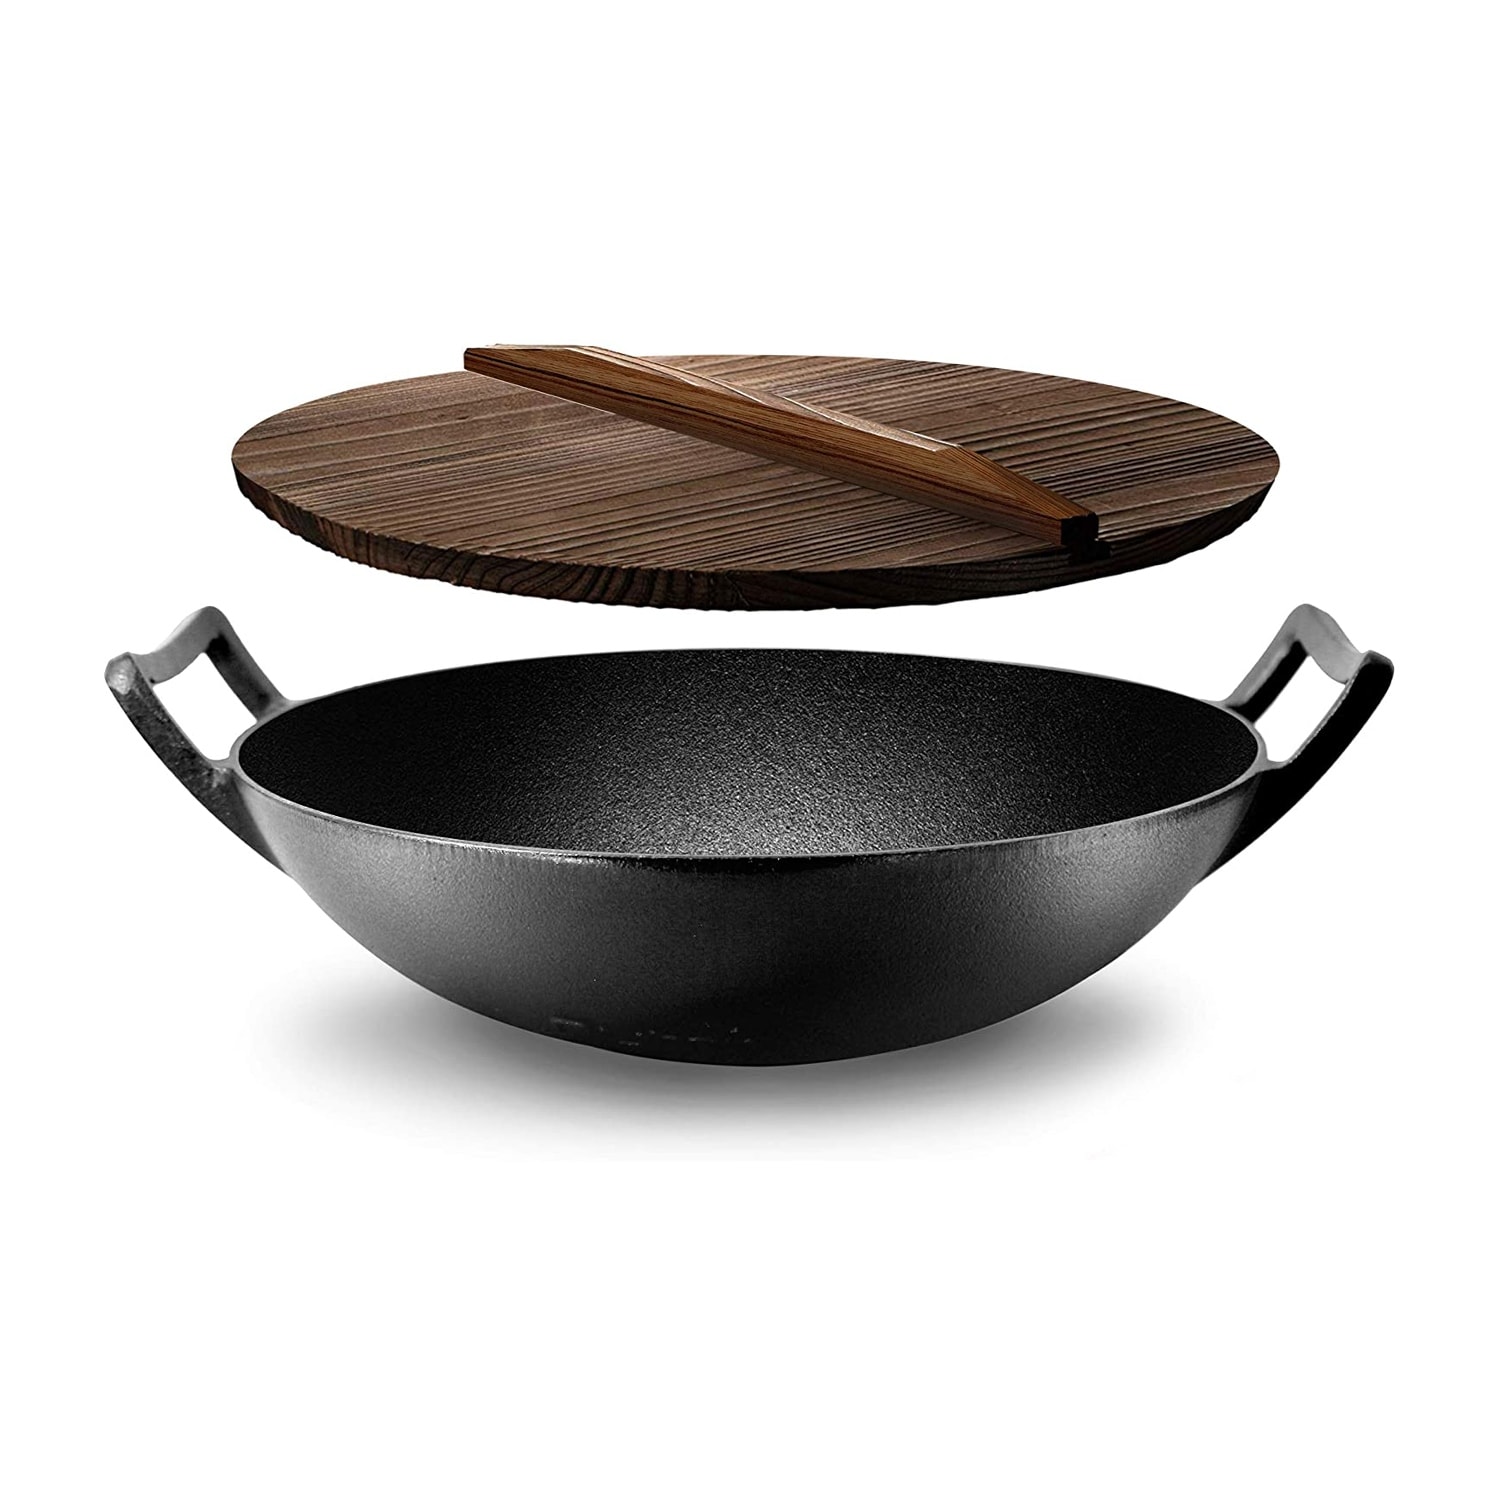 https://ak1.ostkcdn.com/images/products/is/images/direct/06214e55a1260cb9d126ab9dc66e3749e432290b/NutriChef-Pre-Seasoned-Cooking-Wok-Cast-Iron-Stir-Fry-Pan-with-Wooden-Lid%2C-Black.jpg